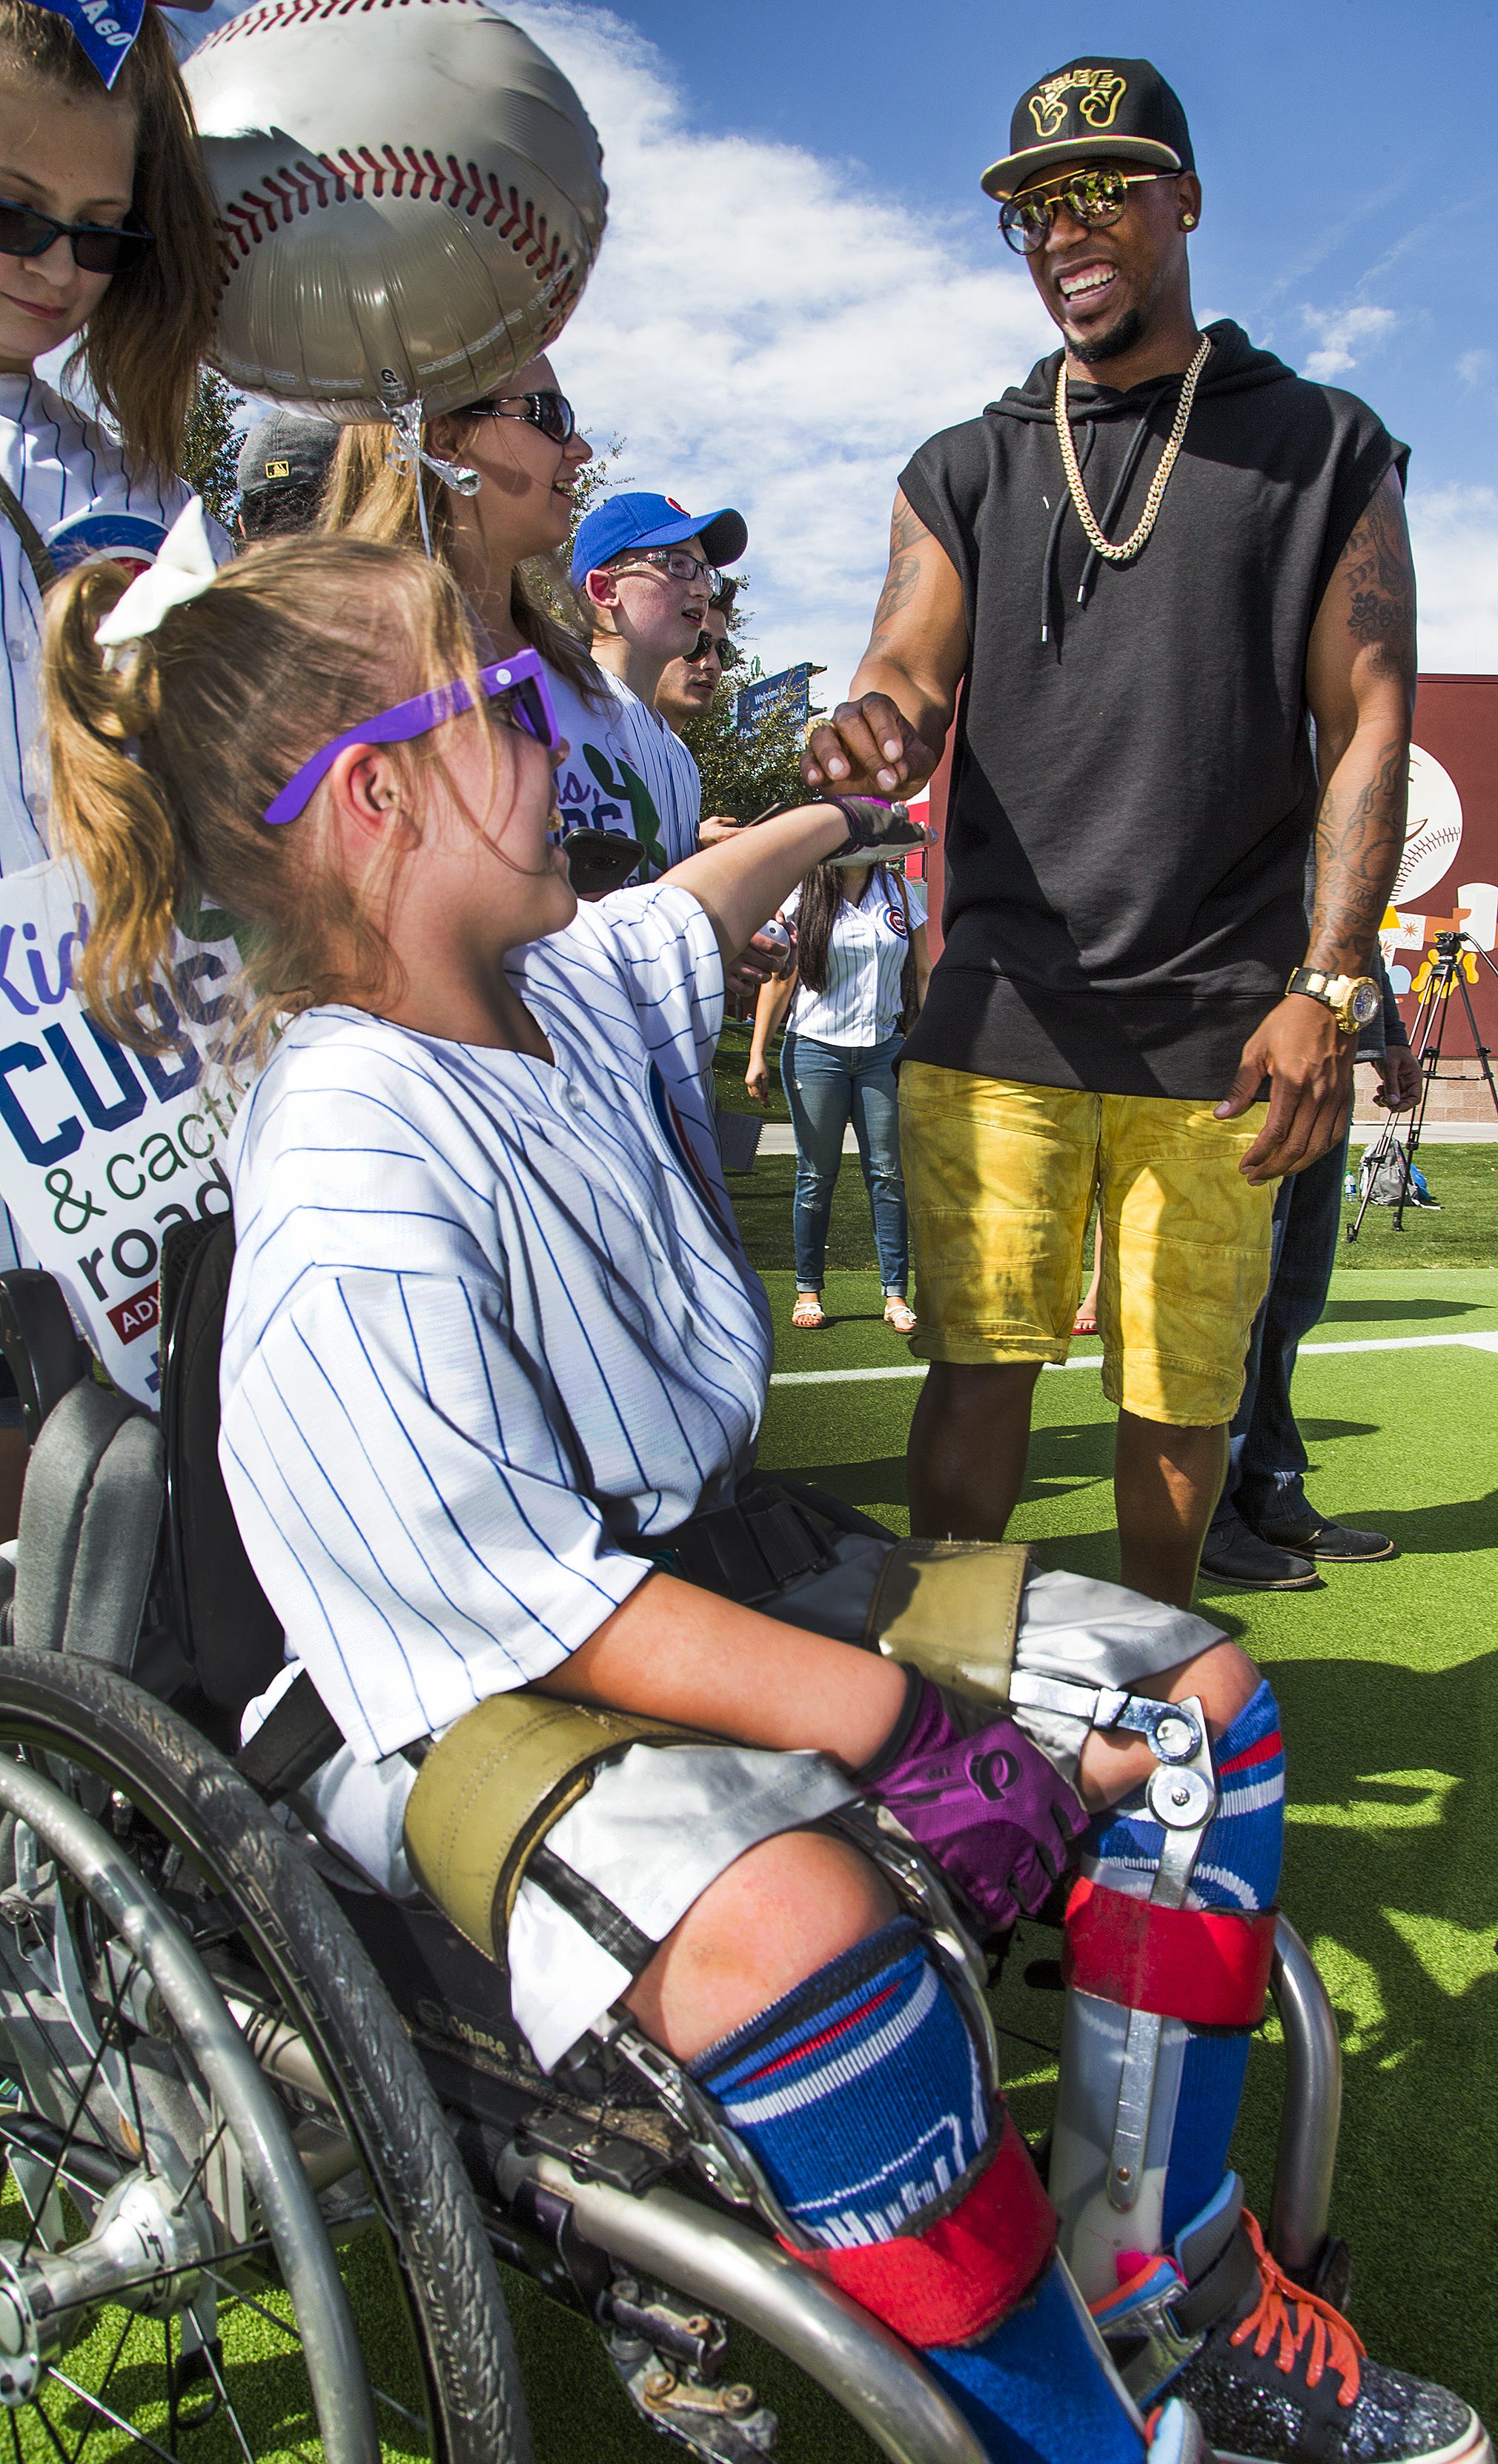 Young Chicago patients fly to Mesa to mingle with the Cubs at spring training